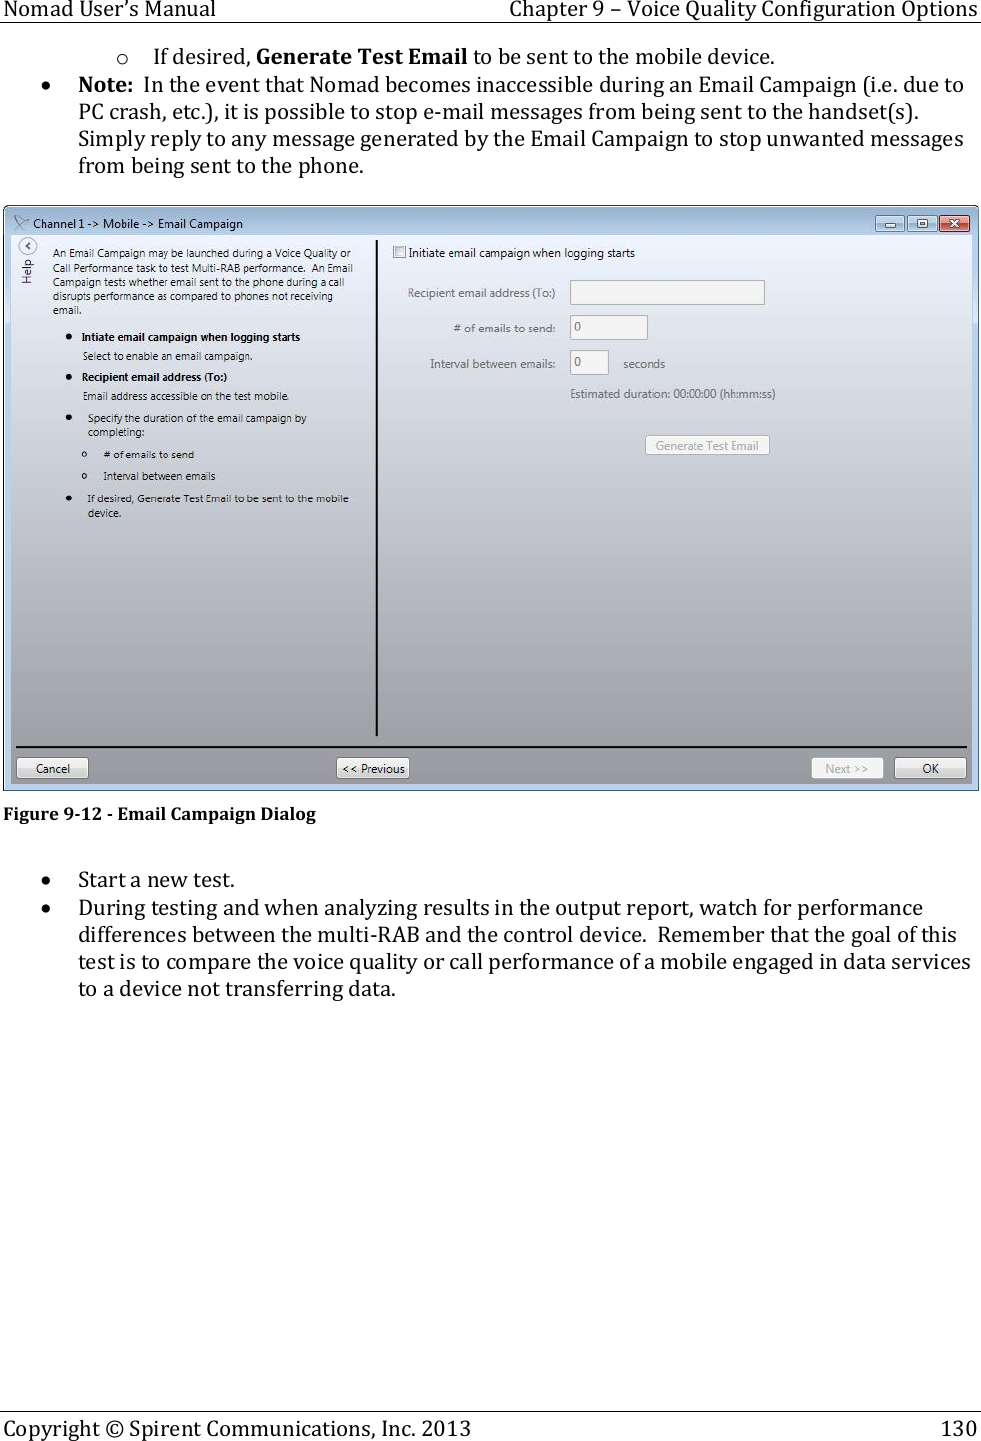  Nomad User’s Manual  Chapter 9 – Voice Quality Configuration Options Copyright © Spirent Communications, Inc. 2013    130  o If desired, Generate Test Email to be sent to the mobile device.  Note:  In the event that Nomad becomes inaccessible during an Email Campaign (i.e. due to PC crash, etc.), it is possible to stop e-mail messages from being sent to the handset(s).  Simply reply to any message generated by the Email Campaign to stop unwanted messages from being sent to the phone.   Figure 9-12 - Email Campaign Dialog   Start a new test.  During testing and when analyzing results in the output report, watch for performance differences between the multi-RAB and the control device.  Remember that the goal of this test is to compare the voice quality or call performance of a mobile engaged in data services to a device not transferring data.   